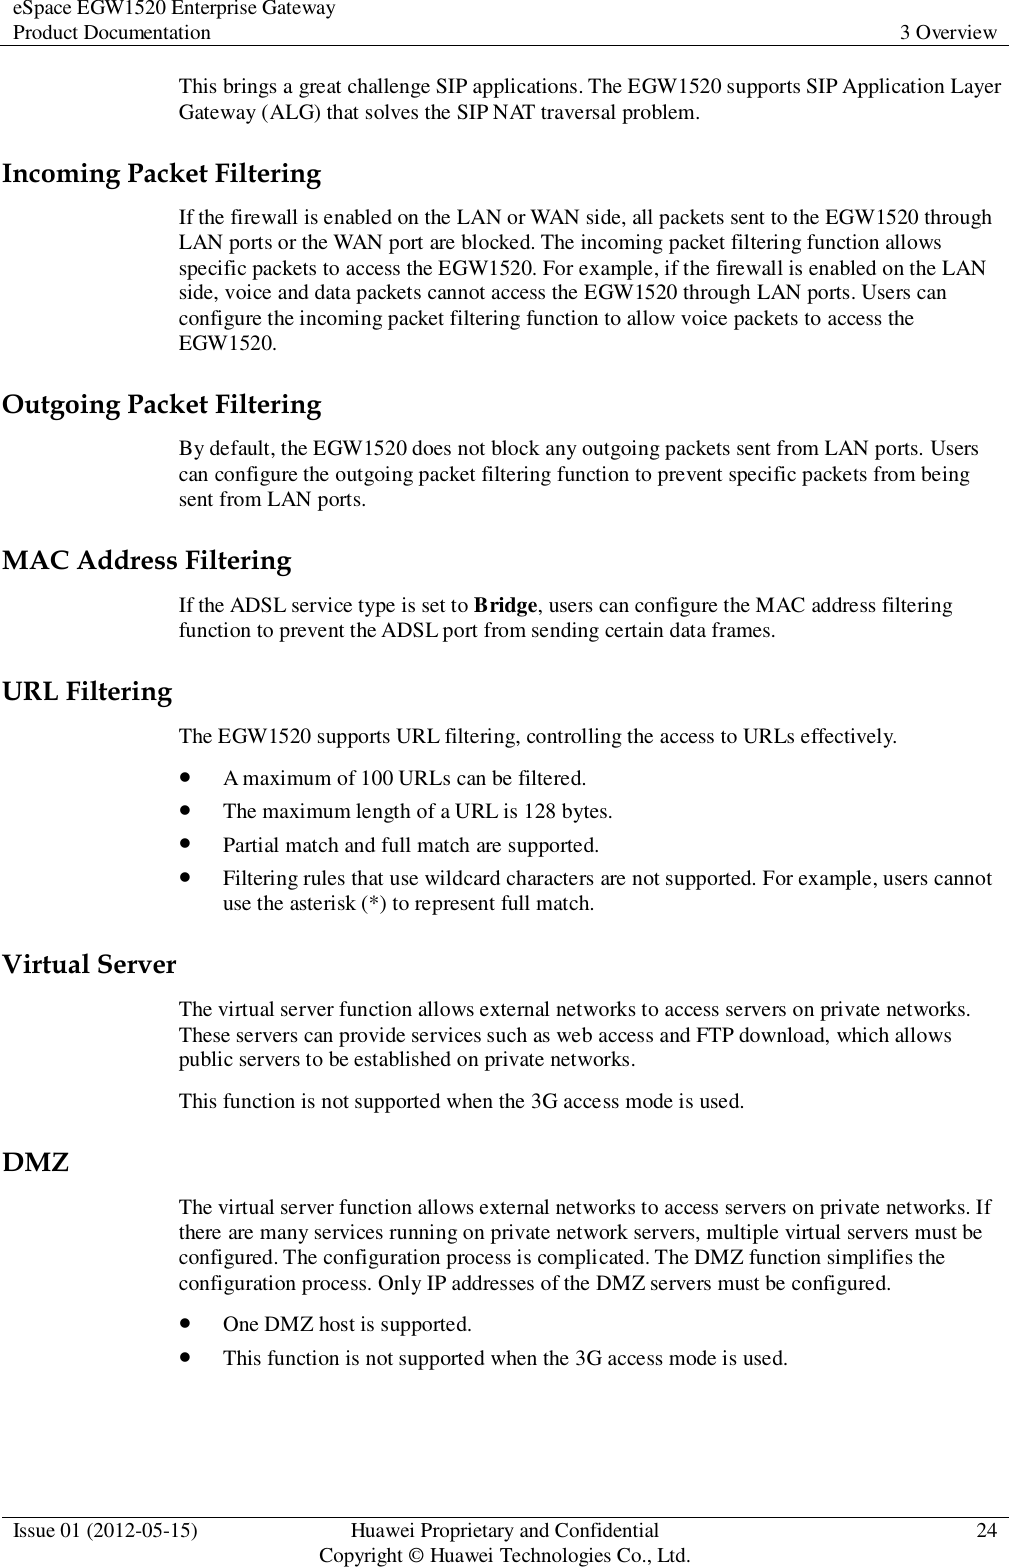 eSpace EGW1520 Enterprise Gateway Product Documentation 3 Overview  Issue 01 (2012-05-15) Huawei Proprietary and Confidential                                     Copyright © Huawei Technologies Co., Ltd. 24  This brings a great challenge SIP applications. The EGW1520 supports SIP Application Layer Gateway (ALG) that solves the SIP NAT traversal problem. Incoming Packet Filtering If the firewall is enabled on the LAN or WAN side, all packets sent to the EGW1520 through LAN ports or the WAN port are blocked. The incoming packet filtering function allows specific packets to access the EGW1520. For example, if the firewall is enabled on the LAN side, voice and data packets cannot access the EGW1520 through LAN ports. Users can configure the incoming packet filtering function to allow voice packets to access the EGW1520. Outgoing Packet Filtering By default, the EGW1520 does not block any outgoing packets sent from LAN ports. Users can configure the outgoing packet filtering function to prevent specific packets from being sent from LAN ports. MAC Address Filtering If the ADSL service type is set to Bridge, users can configure the MAC address filtering function to prevent the ADSL port from sending certain data frames. URL Filtering The EGW1520 supports URL filtering, controlling the access to URLs effectively.  A maximum of 100 URLs can be filtered.  The maximum length of a URL is 128 bytes.  Partial match and full match are supported.  Filtering rules that use wildcard characters are not supported. For example, users cannot use the asterisk (*) to represent full match. Virtual Server The virtual server function allows external networks to access servers on private networks. These servers can provide services such as web access and FTP download, which allows public servers to be established on private networks. This function is not supported when the 3G access mode is used. DMZ The virtual server function allows external networks to access servers on private networks. If there are many services running on private network servers, multiple virtual servers must be configured. The configuration process is complicated. The DMZ function simplifies the configuration process. Only IP addresses of the DMZ servers must be configured.  One DMZ host is supported.  This function is not supported when the 3G access mode is used. 